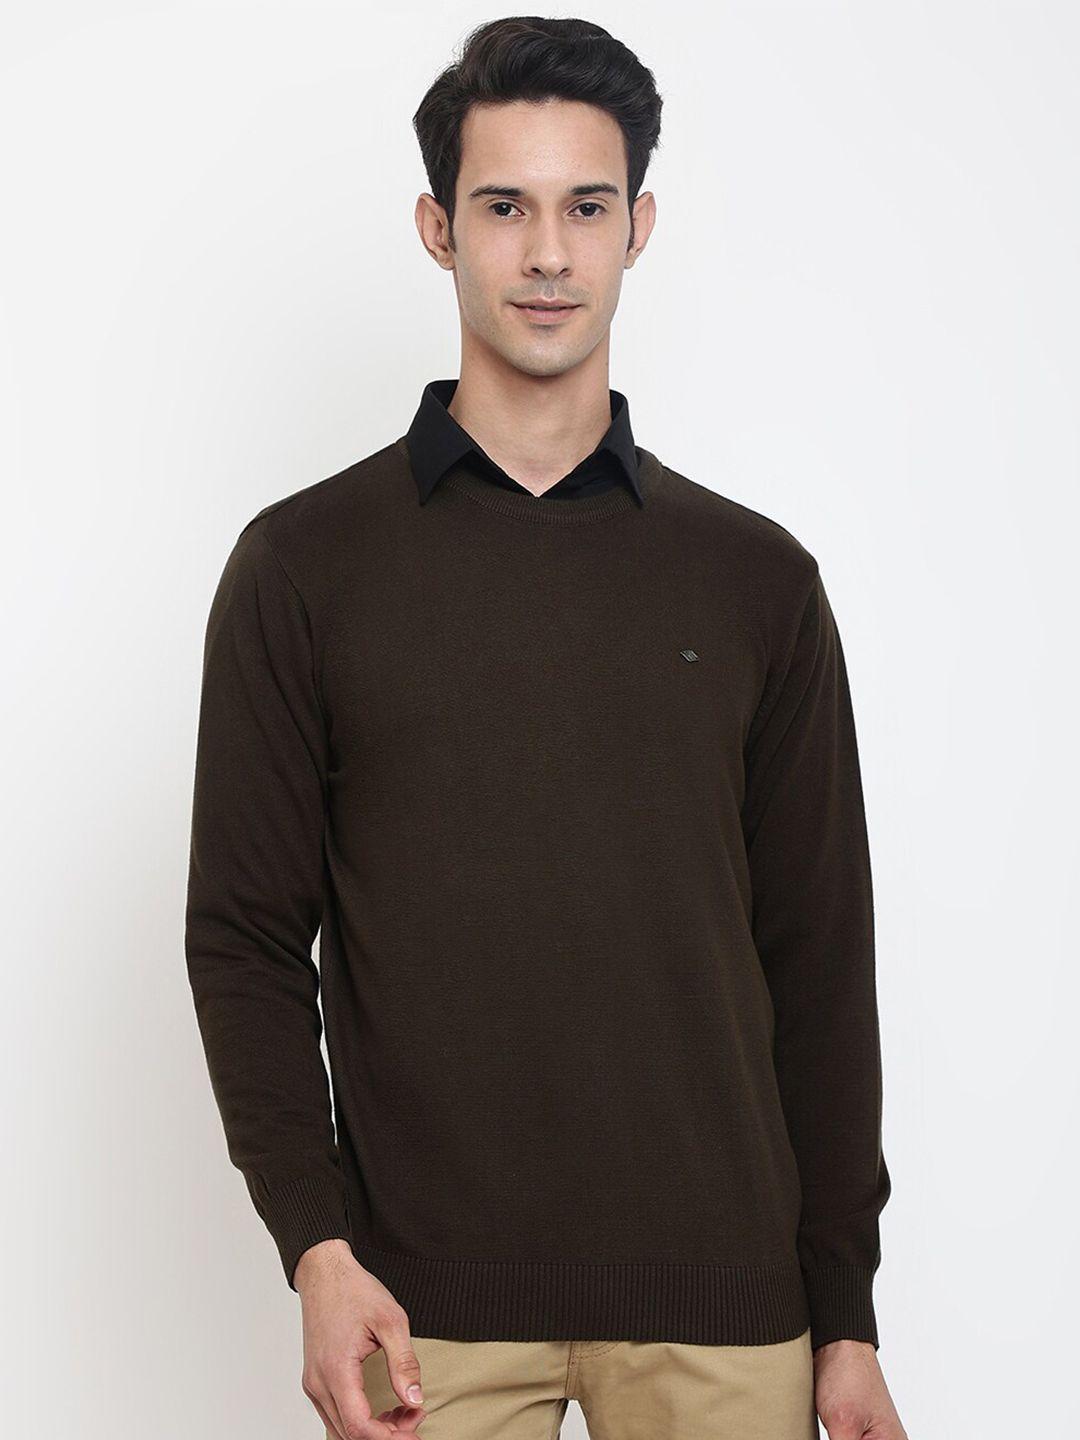 cantabil-men-olive-green-solid-wool-round-neck-pullover